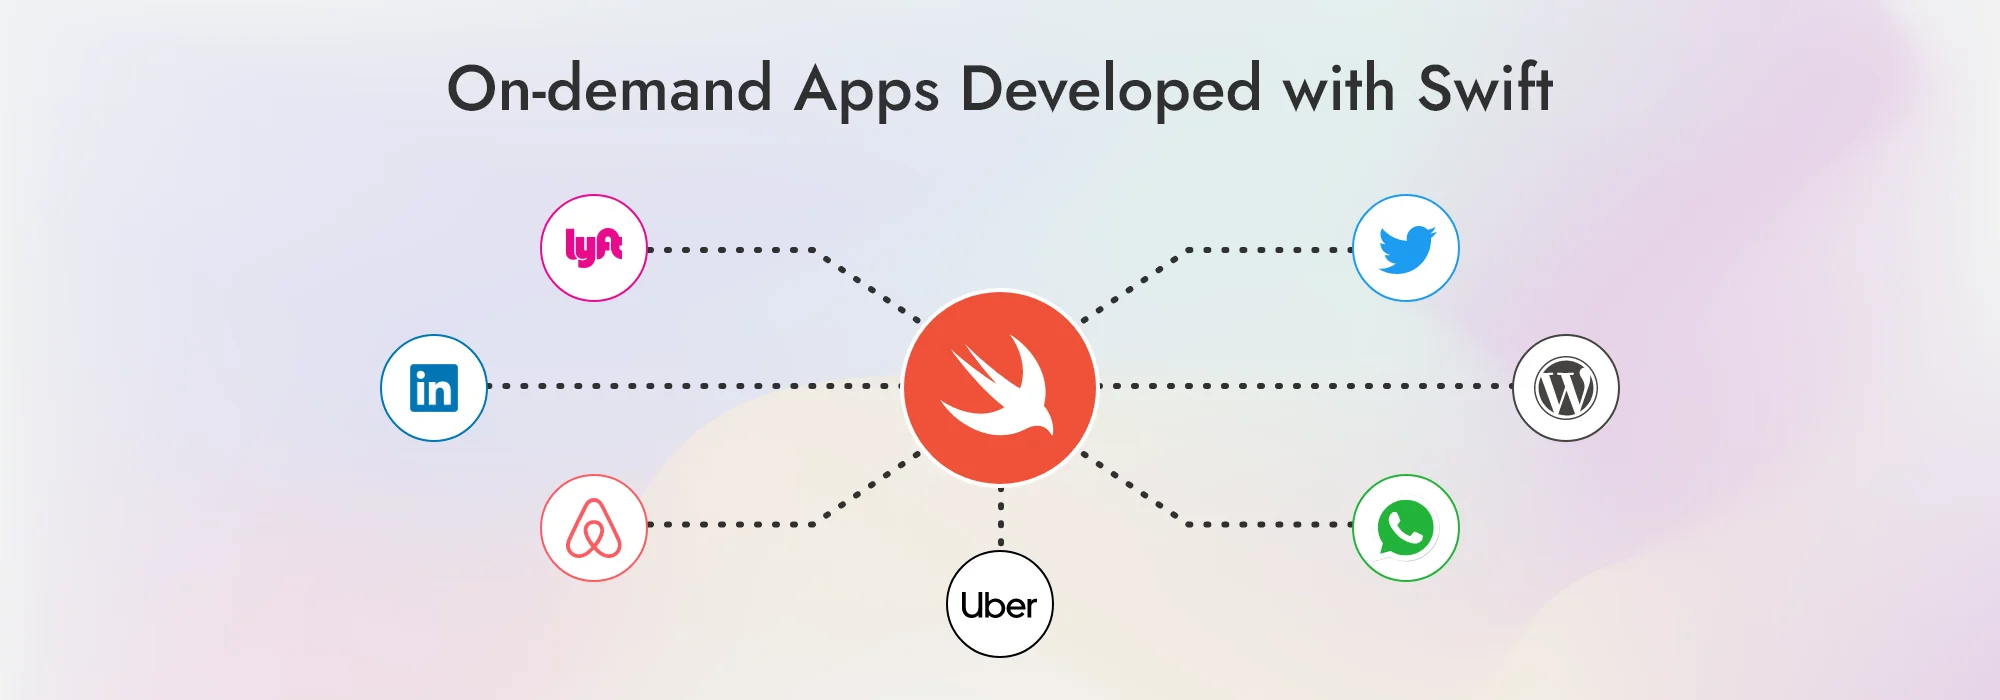 On-demand Apps Developed with Swift